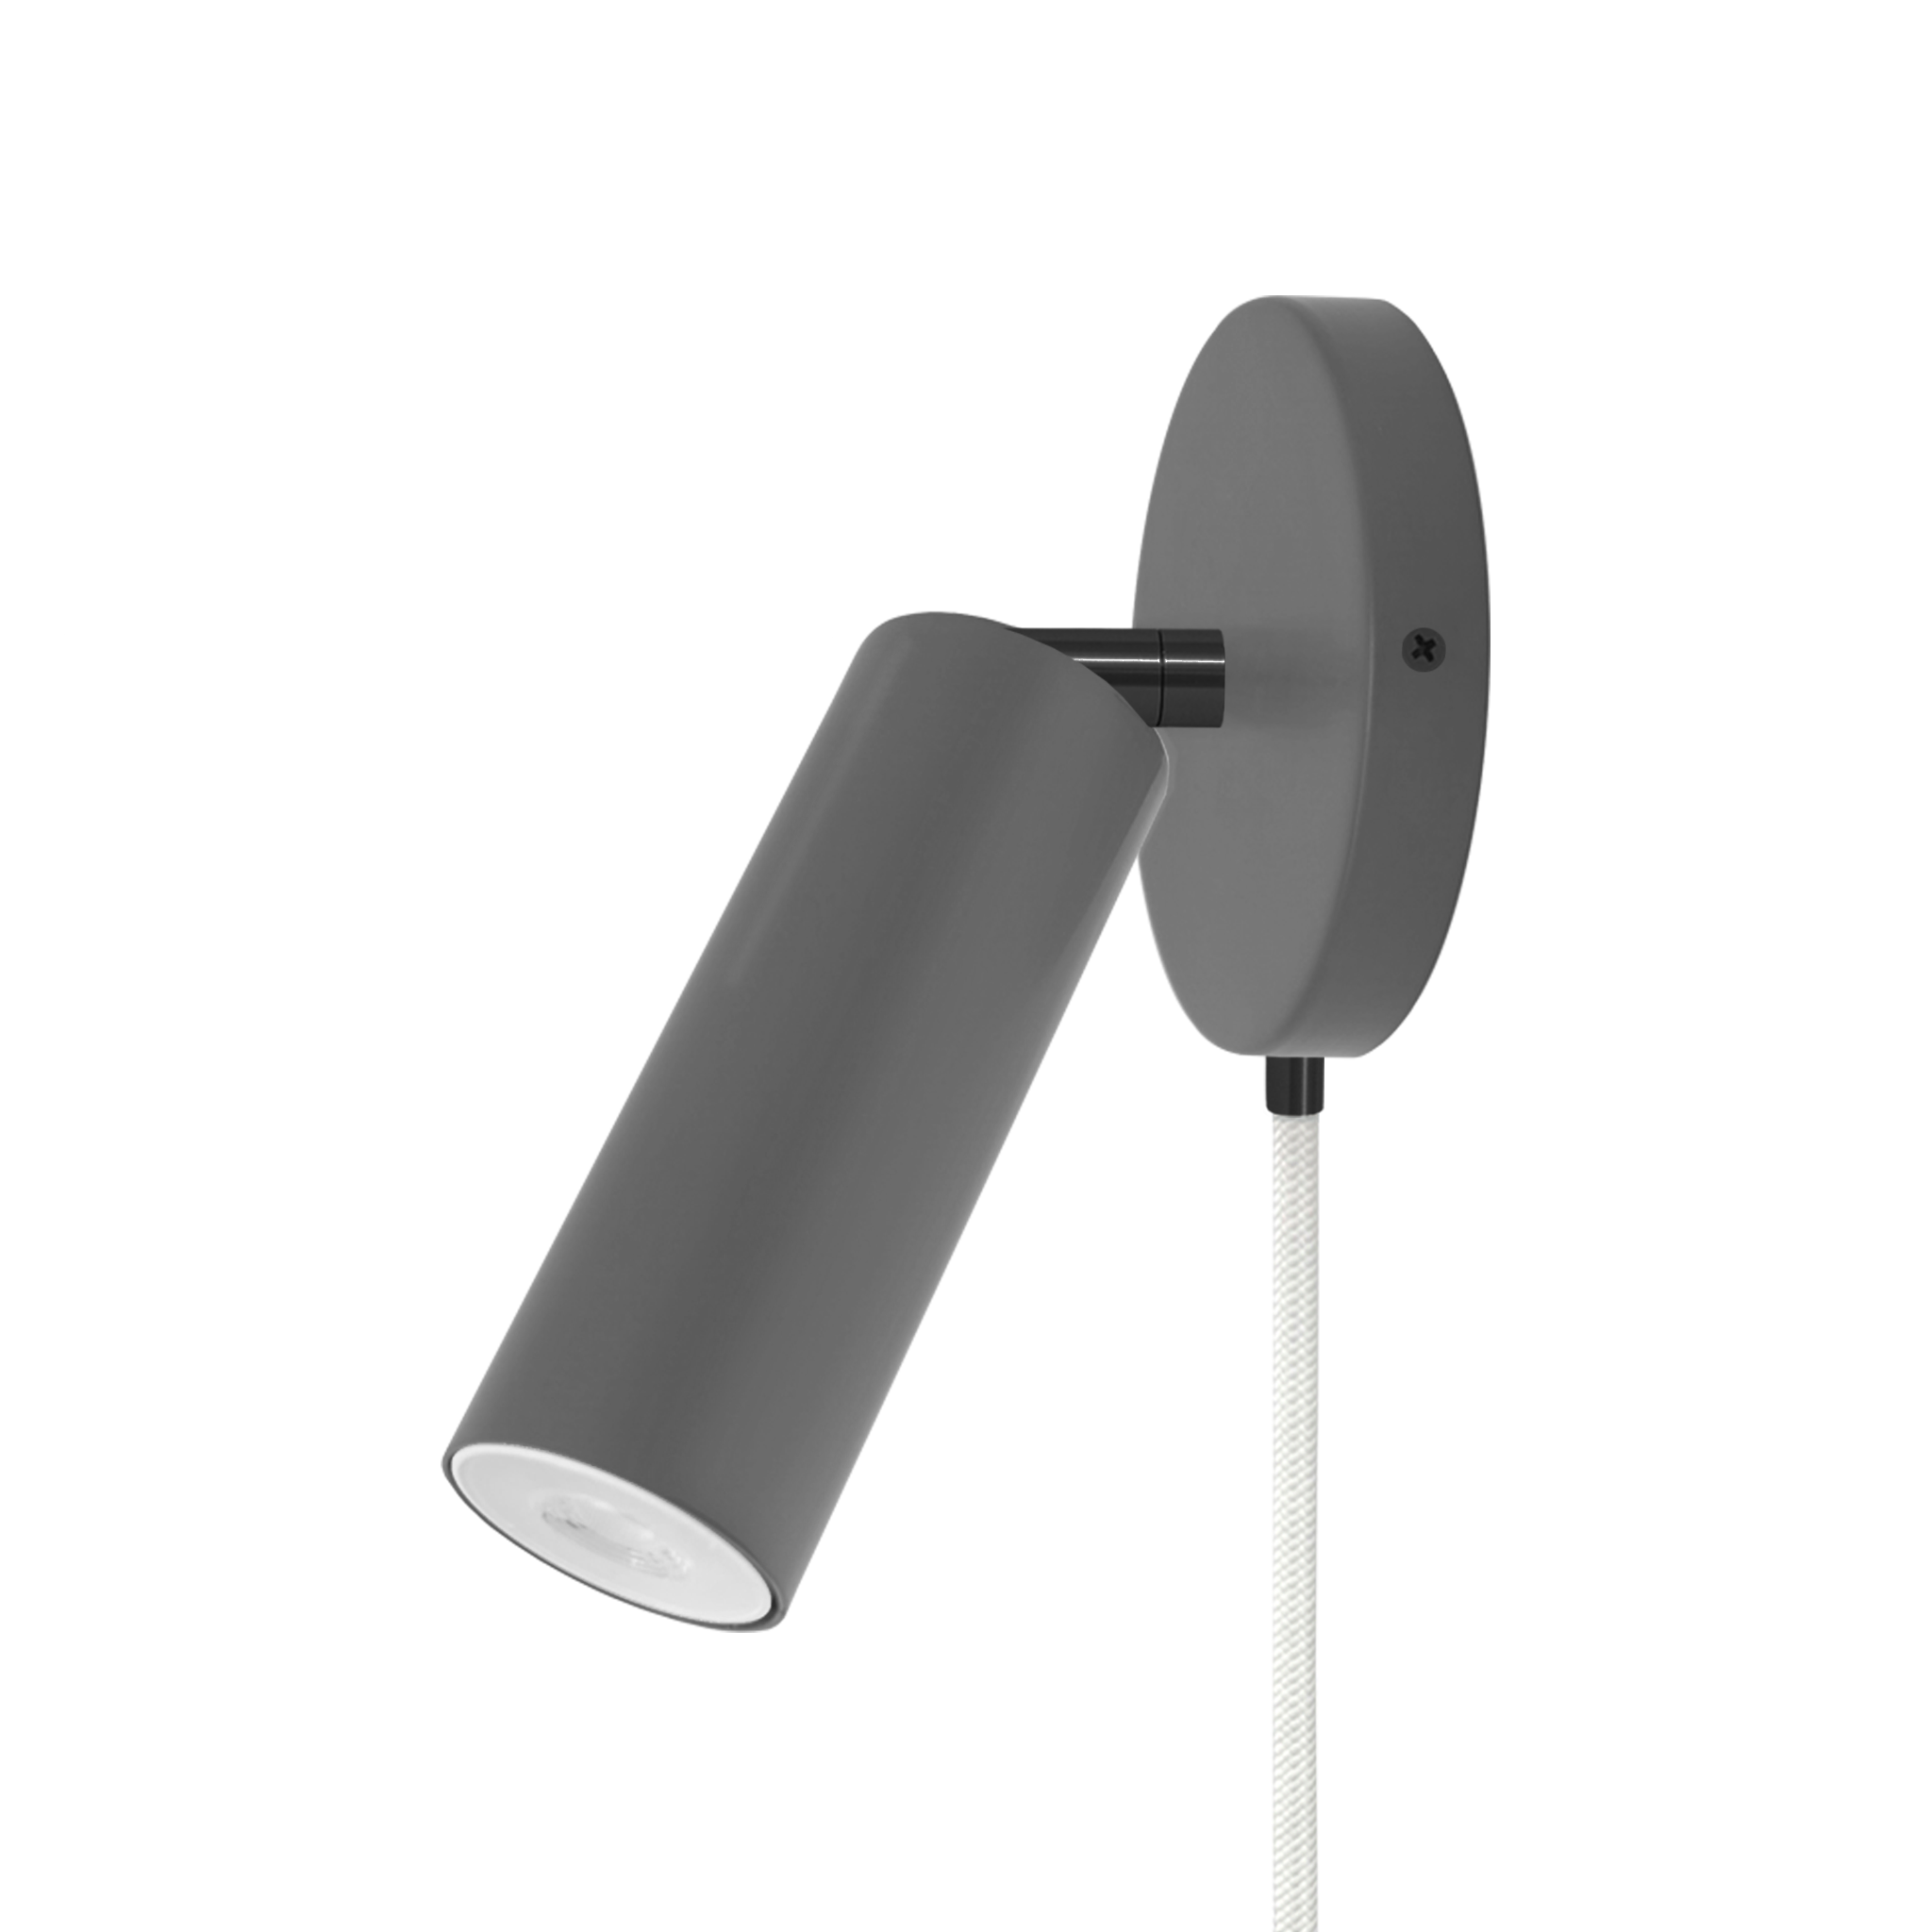 Black and charcoal color Reader plug-in sconce no arm Dutton Brown lighting